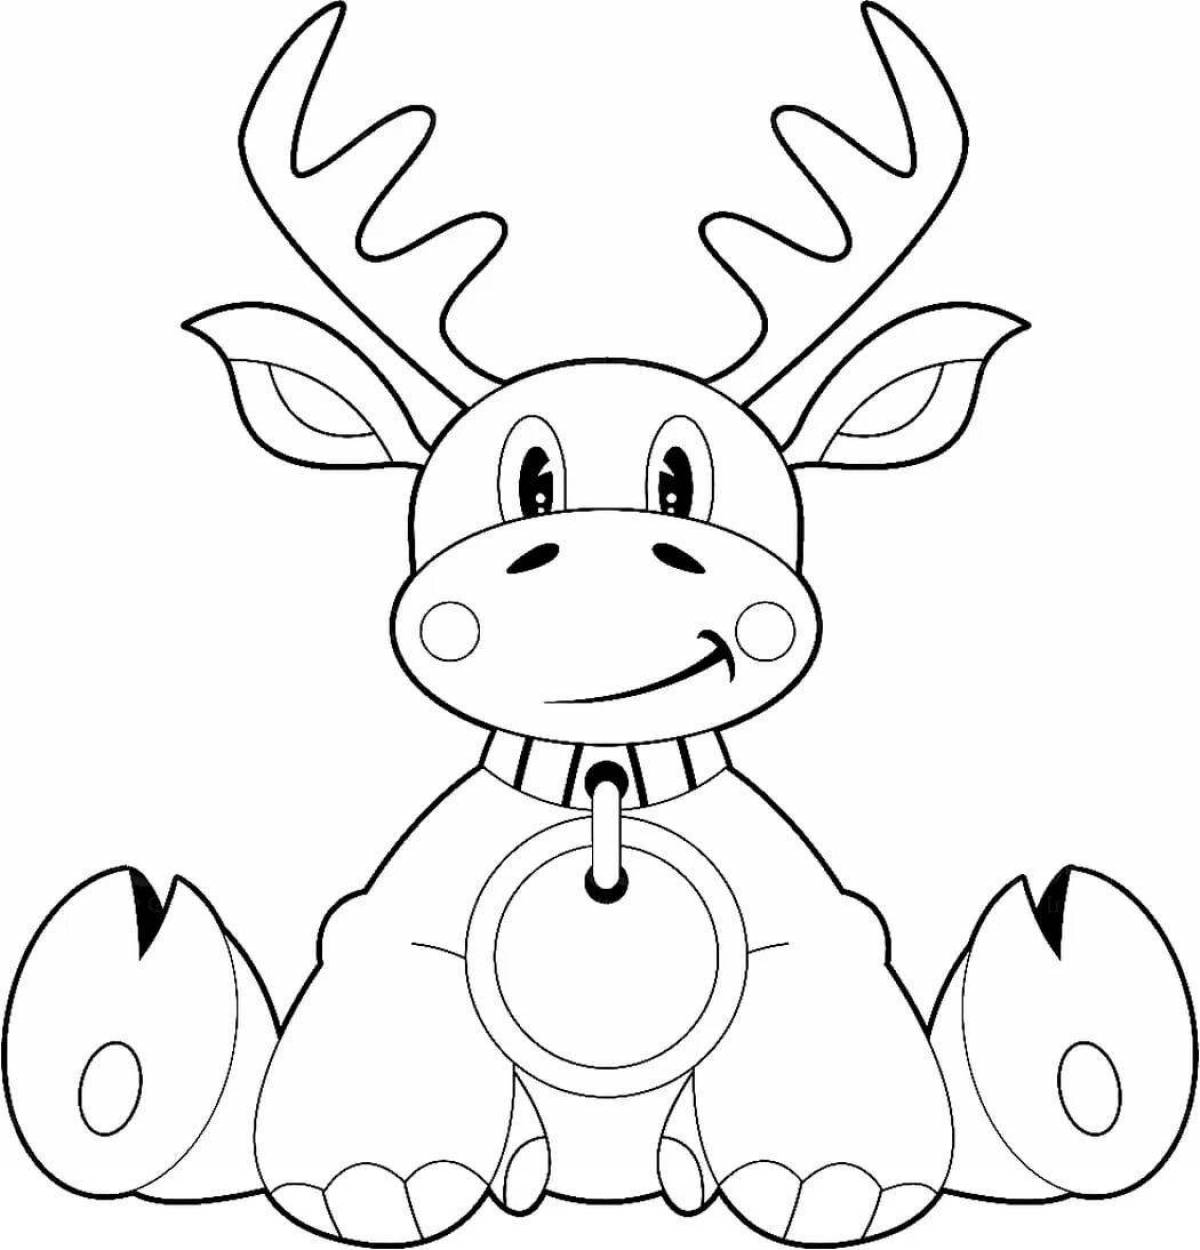 Majestic Christmas deer coloring page